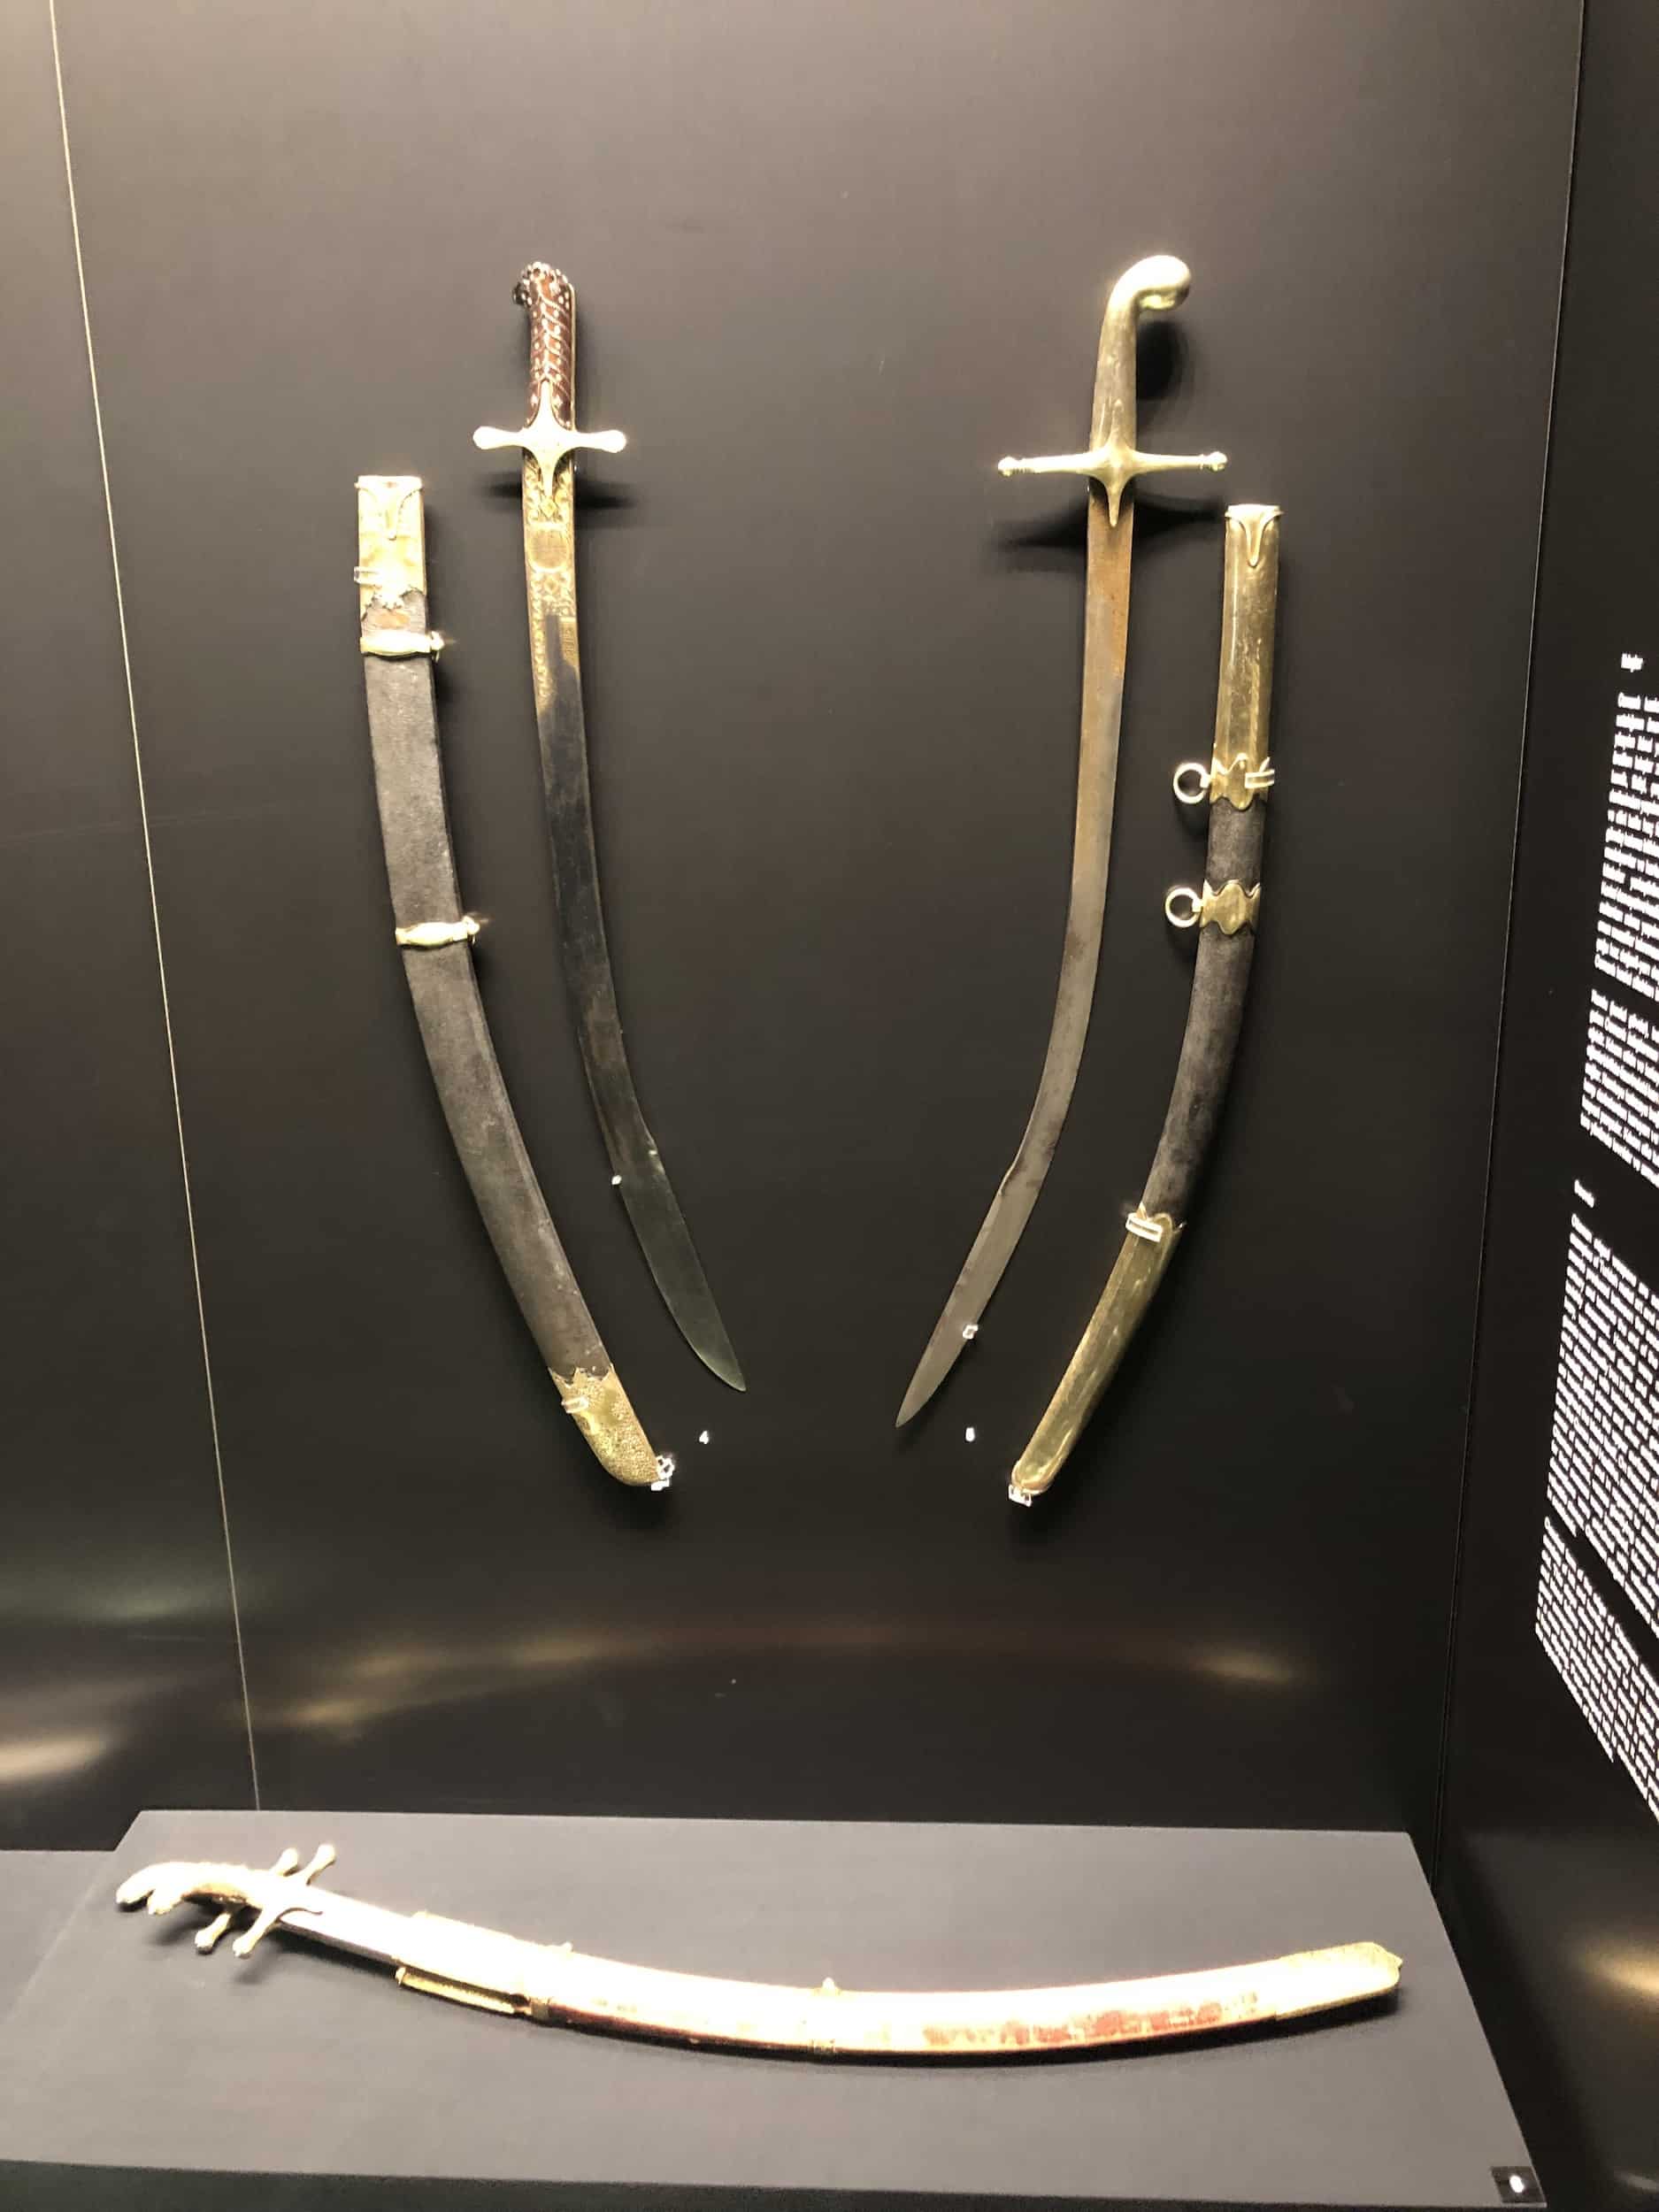 Swords in the weapons collection